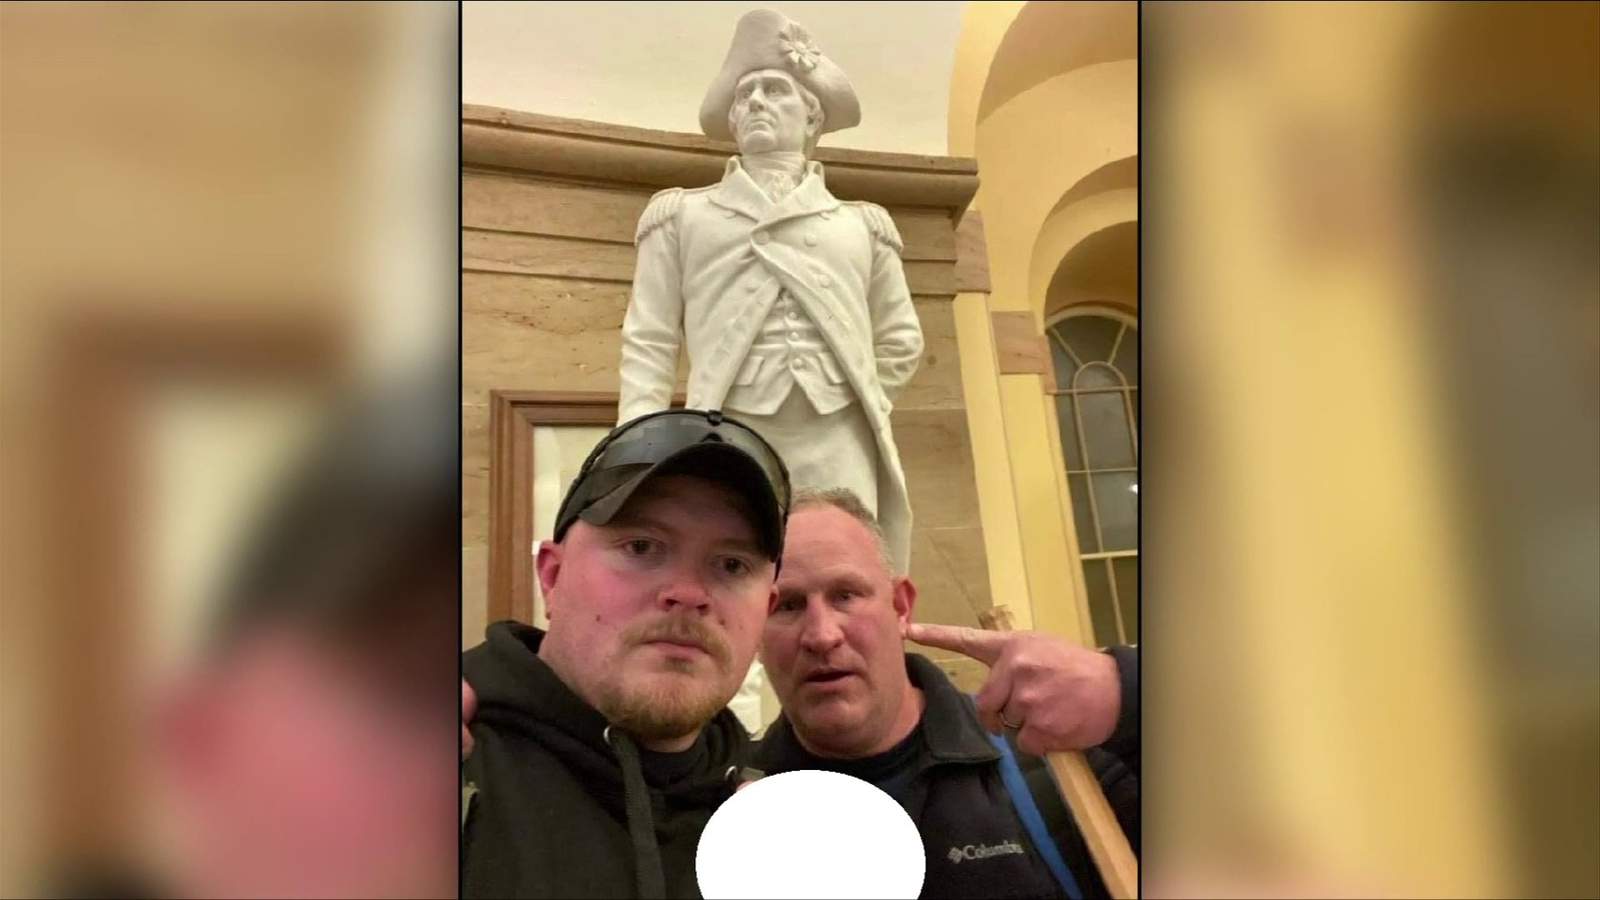 Photo surfaces showing two Rocky Mount policemen inside the Capitol on Wednesday